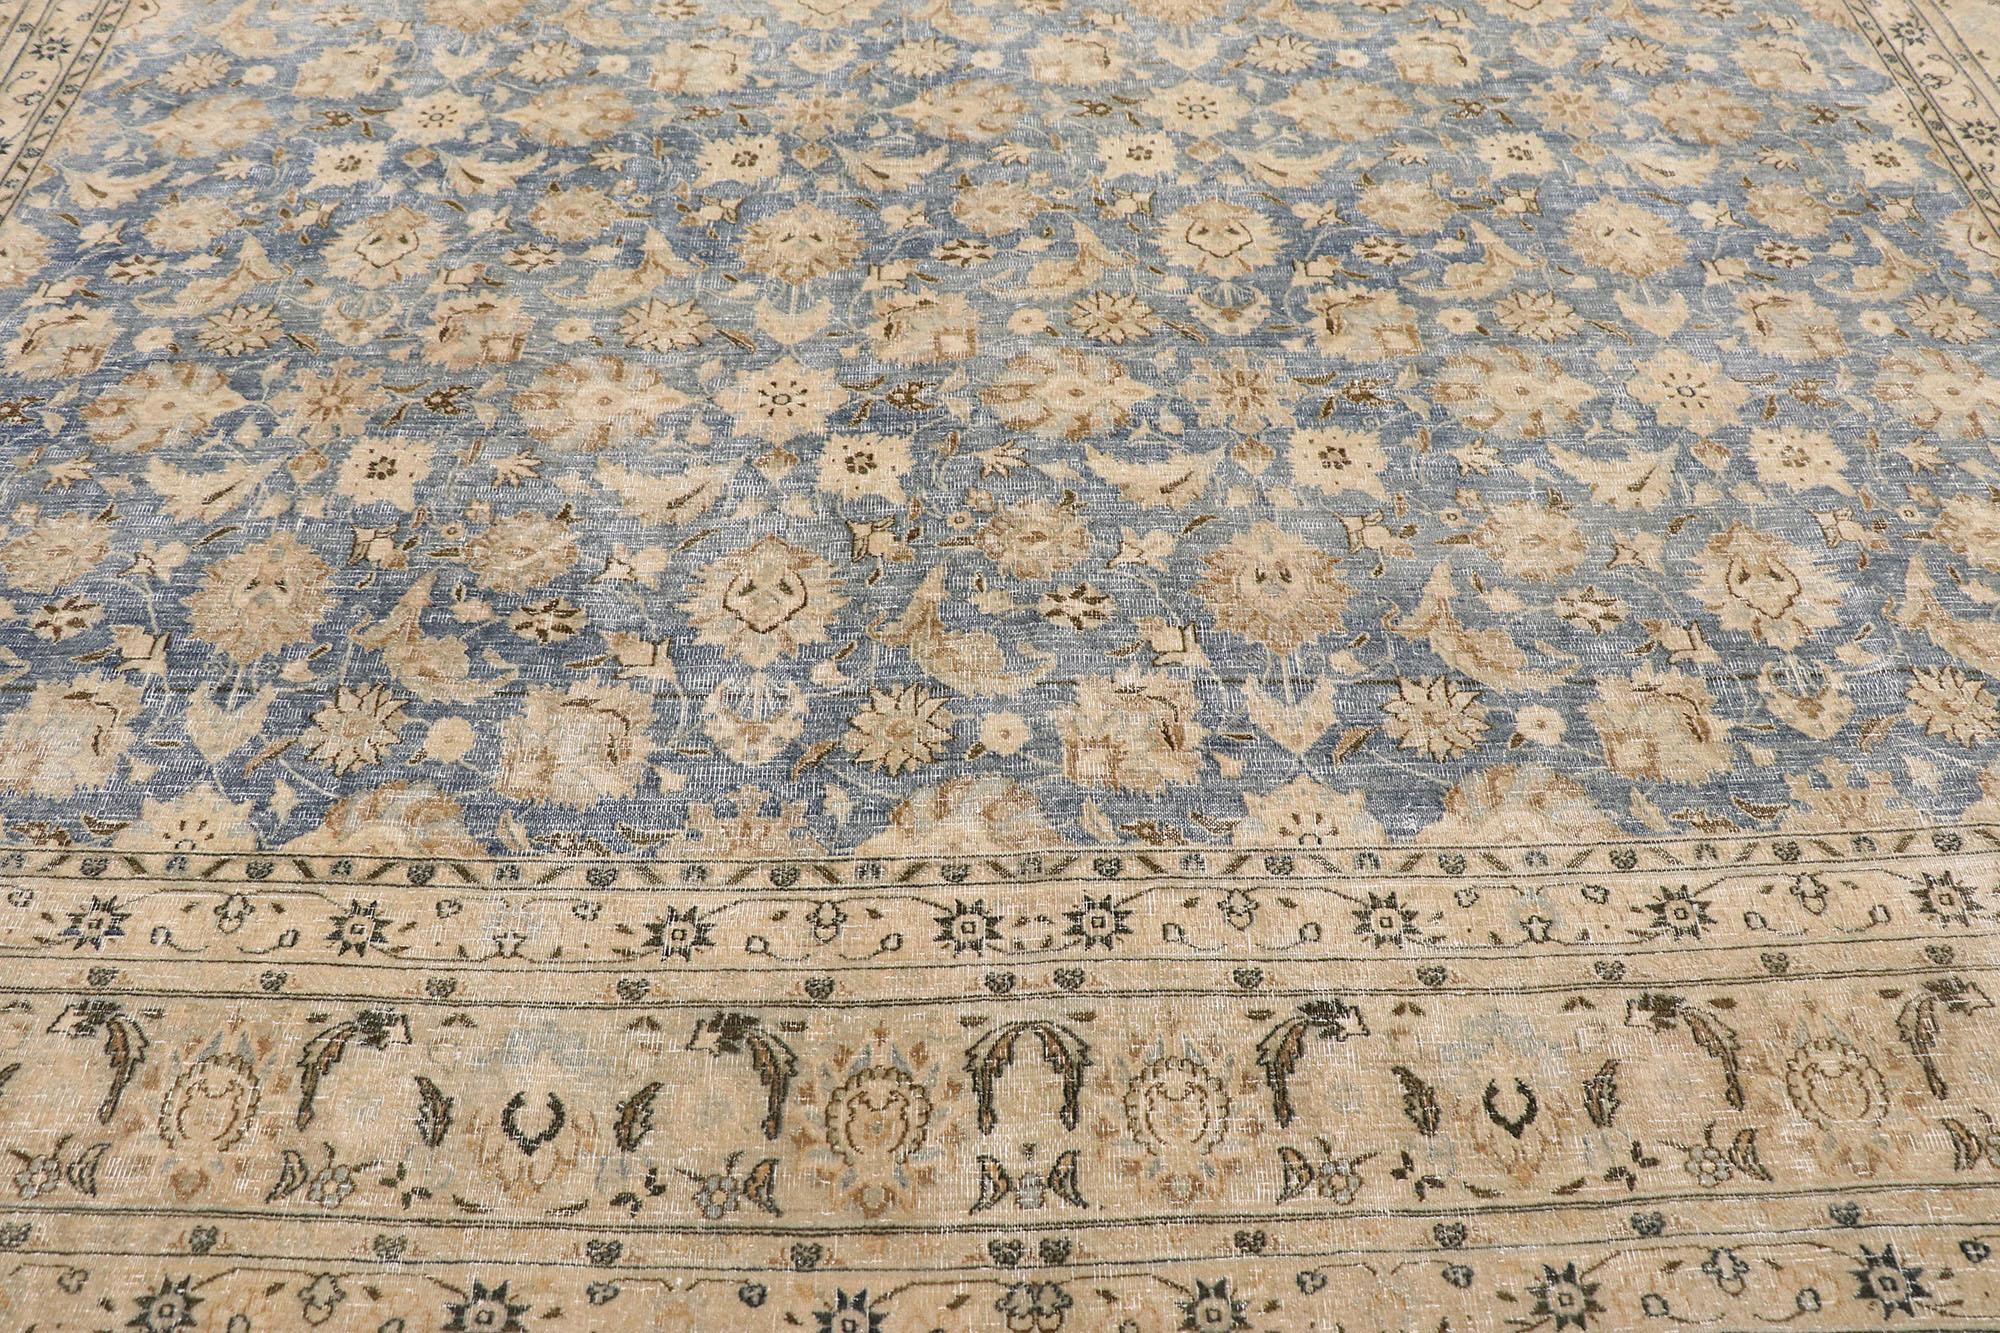 Hand-Knotted Distressed Vintage Persian Rug with Rustic Coastal Style